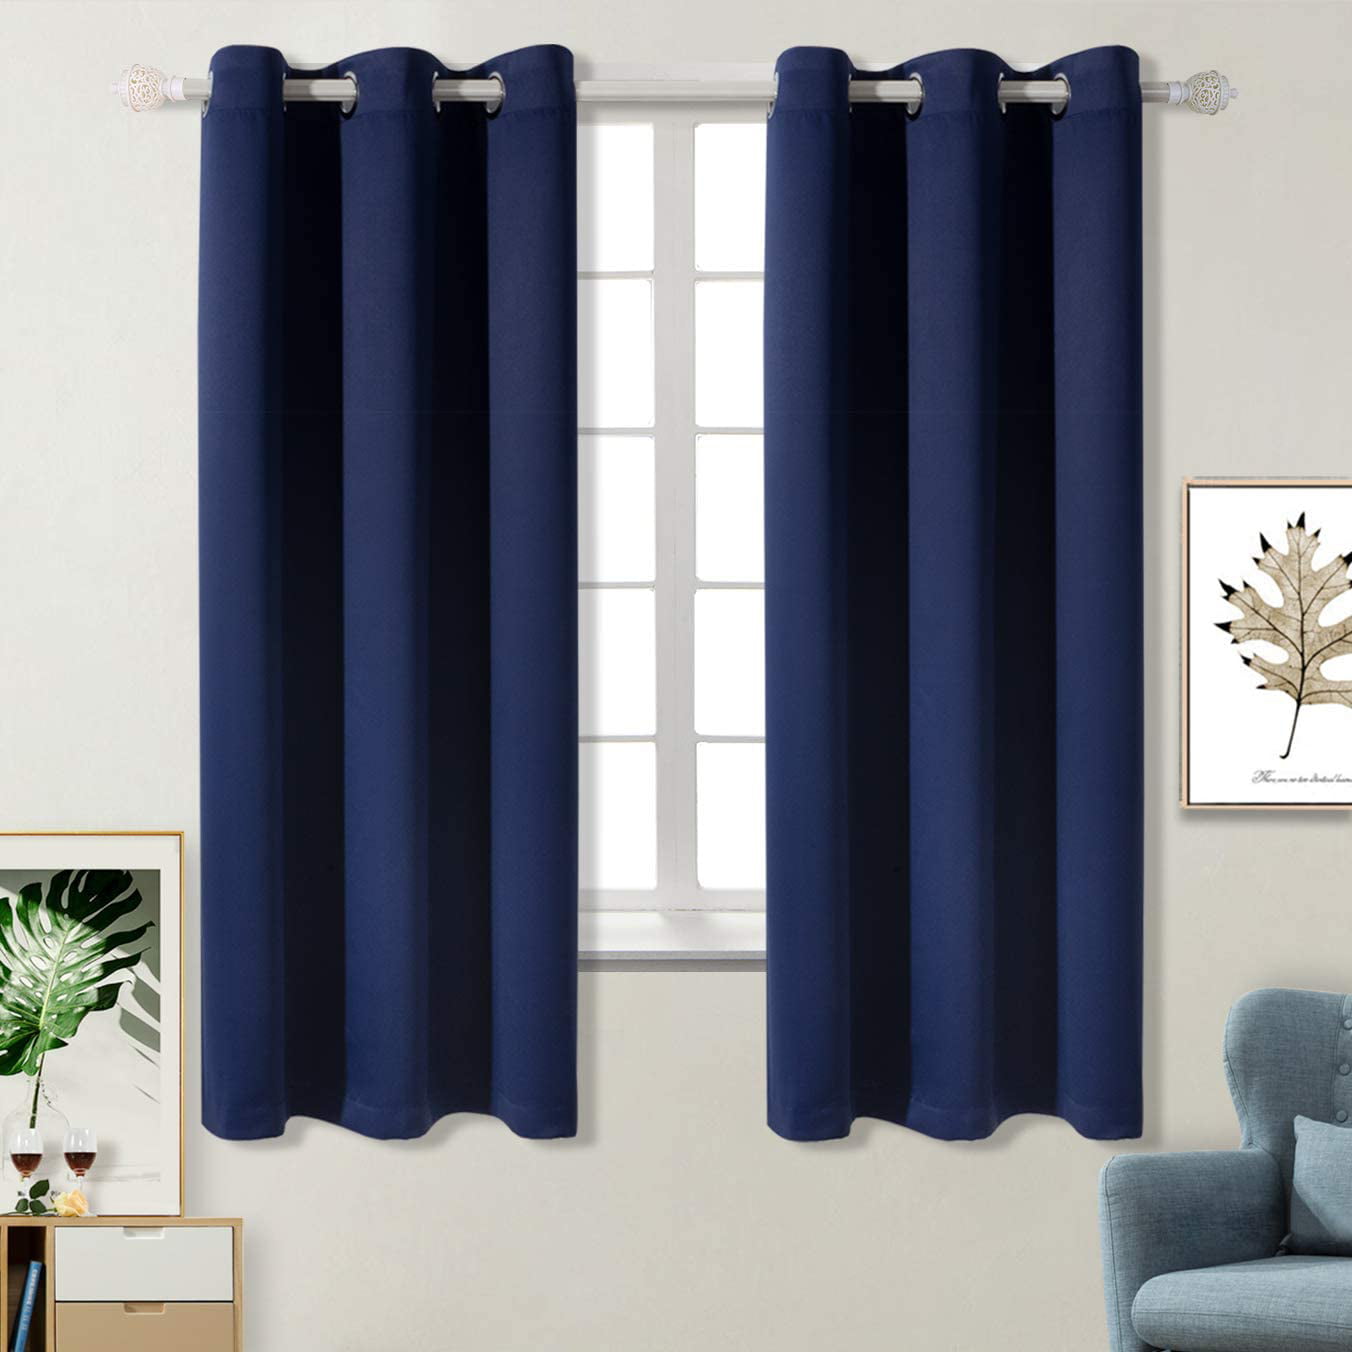 Blackout Curtains for Bedroom - Grommet Thermal Insulated Room